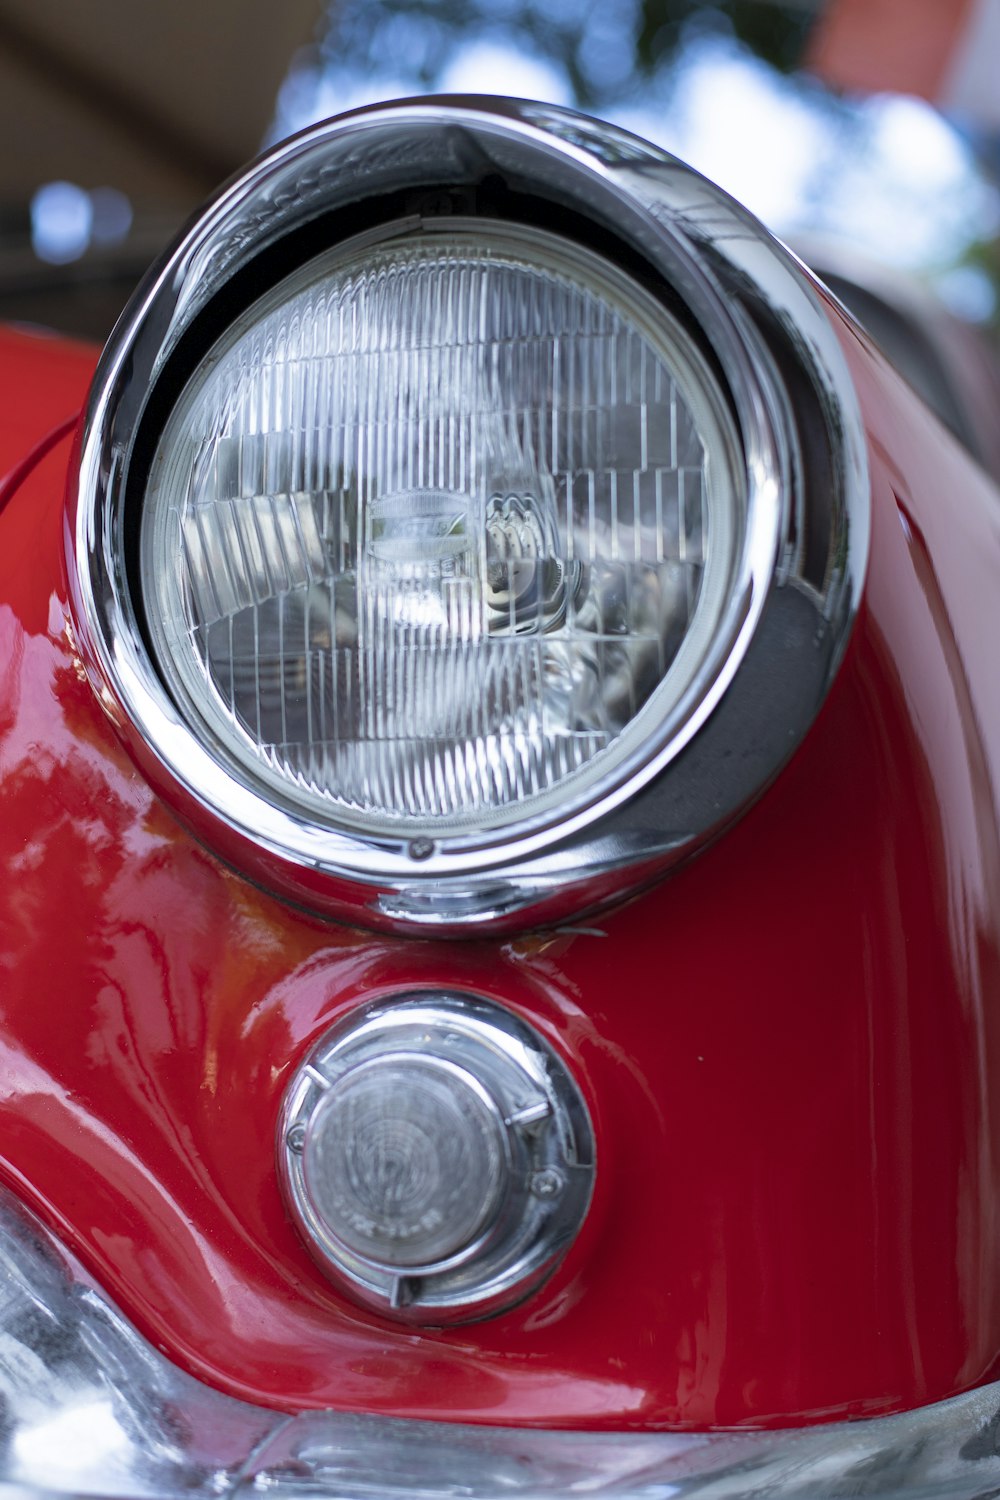 a close up of a red motorcycle headlight